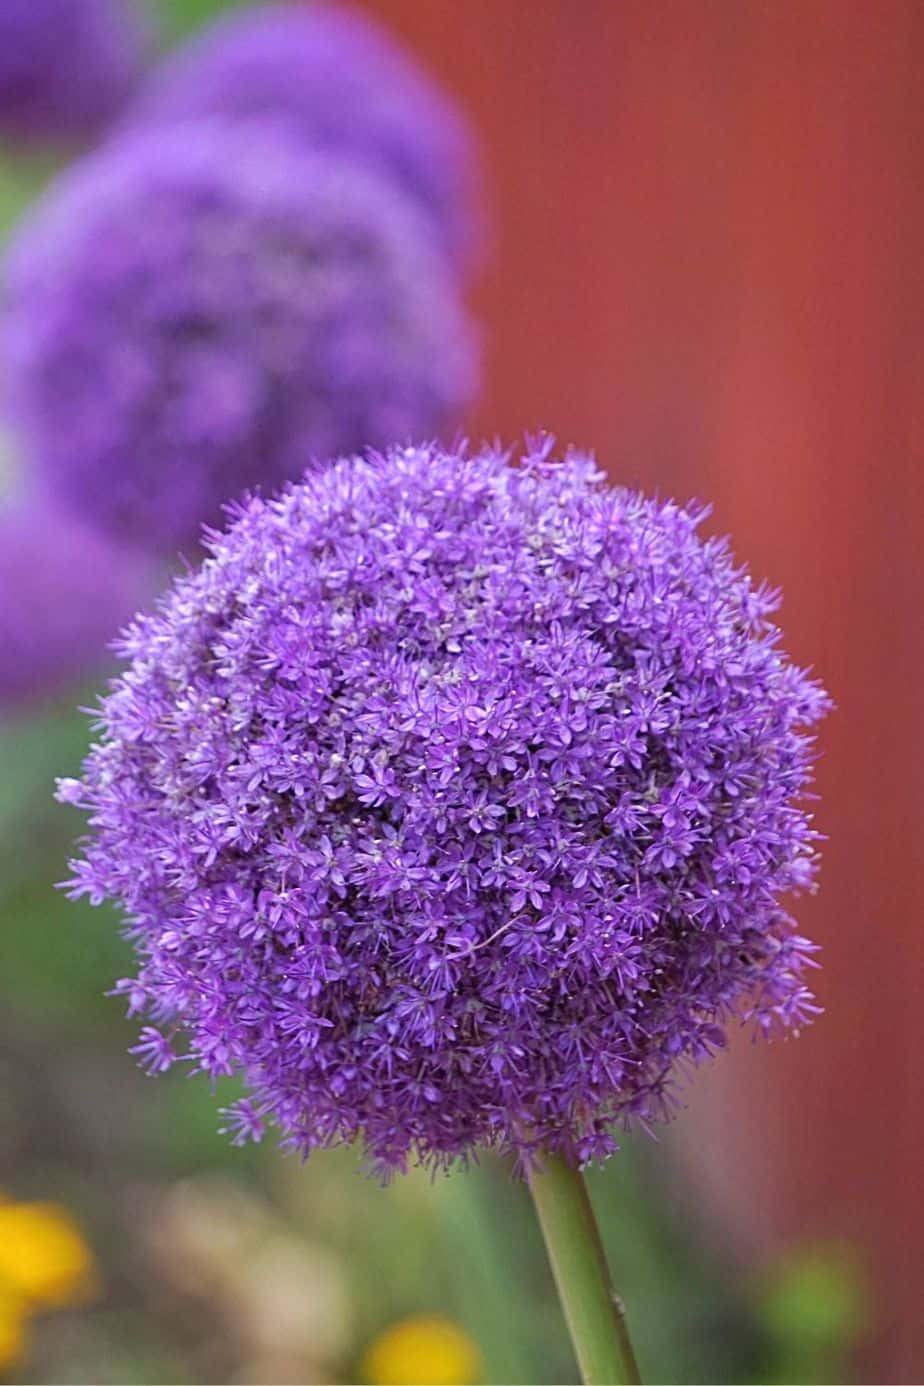 Allium has interesting pompom-shaped flowers that looks great on your southeast facing garden